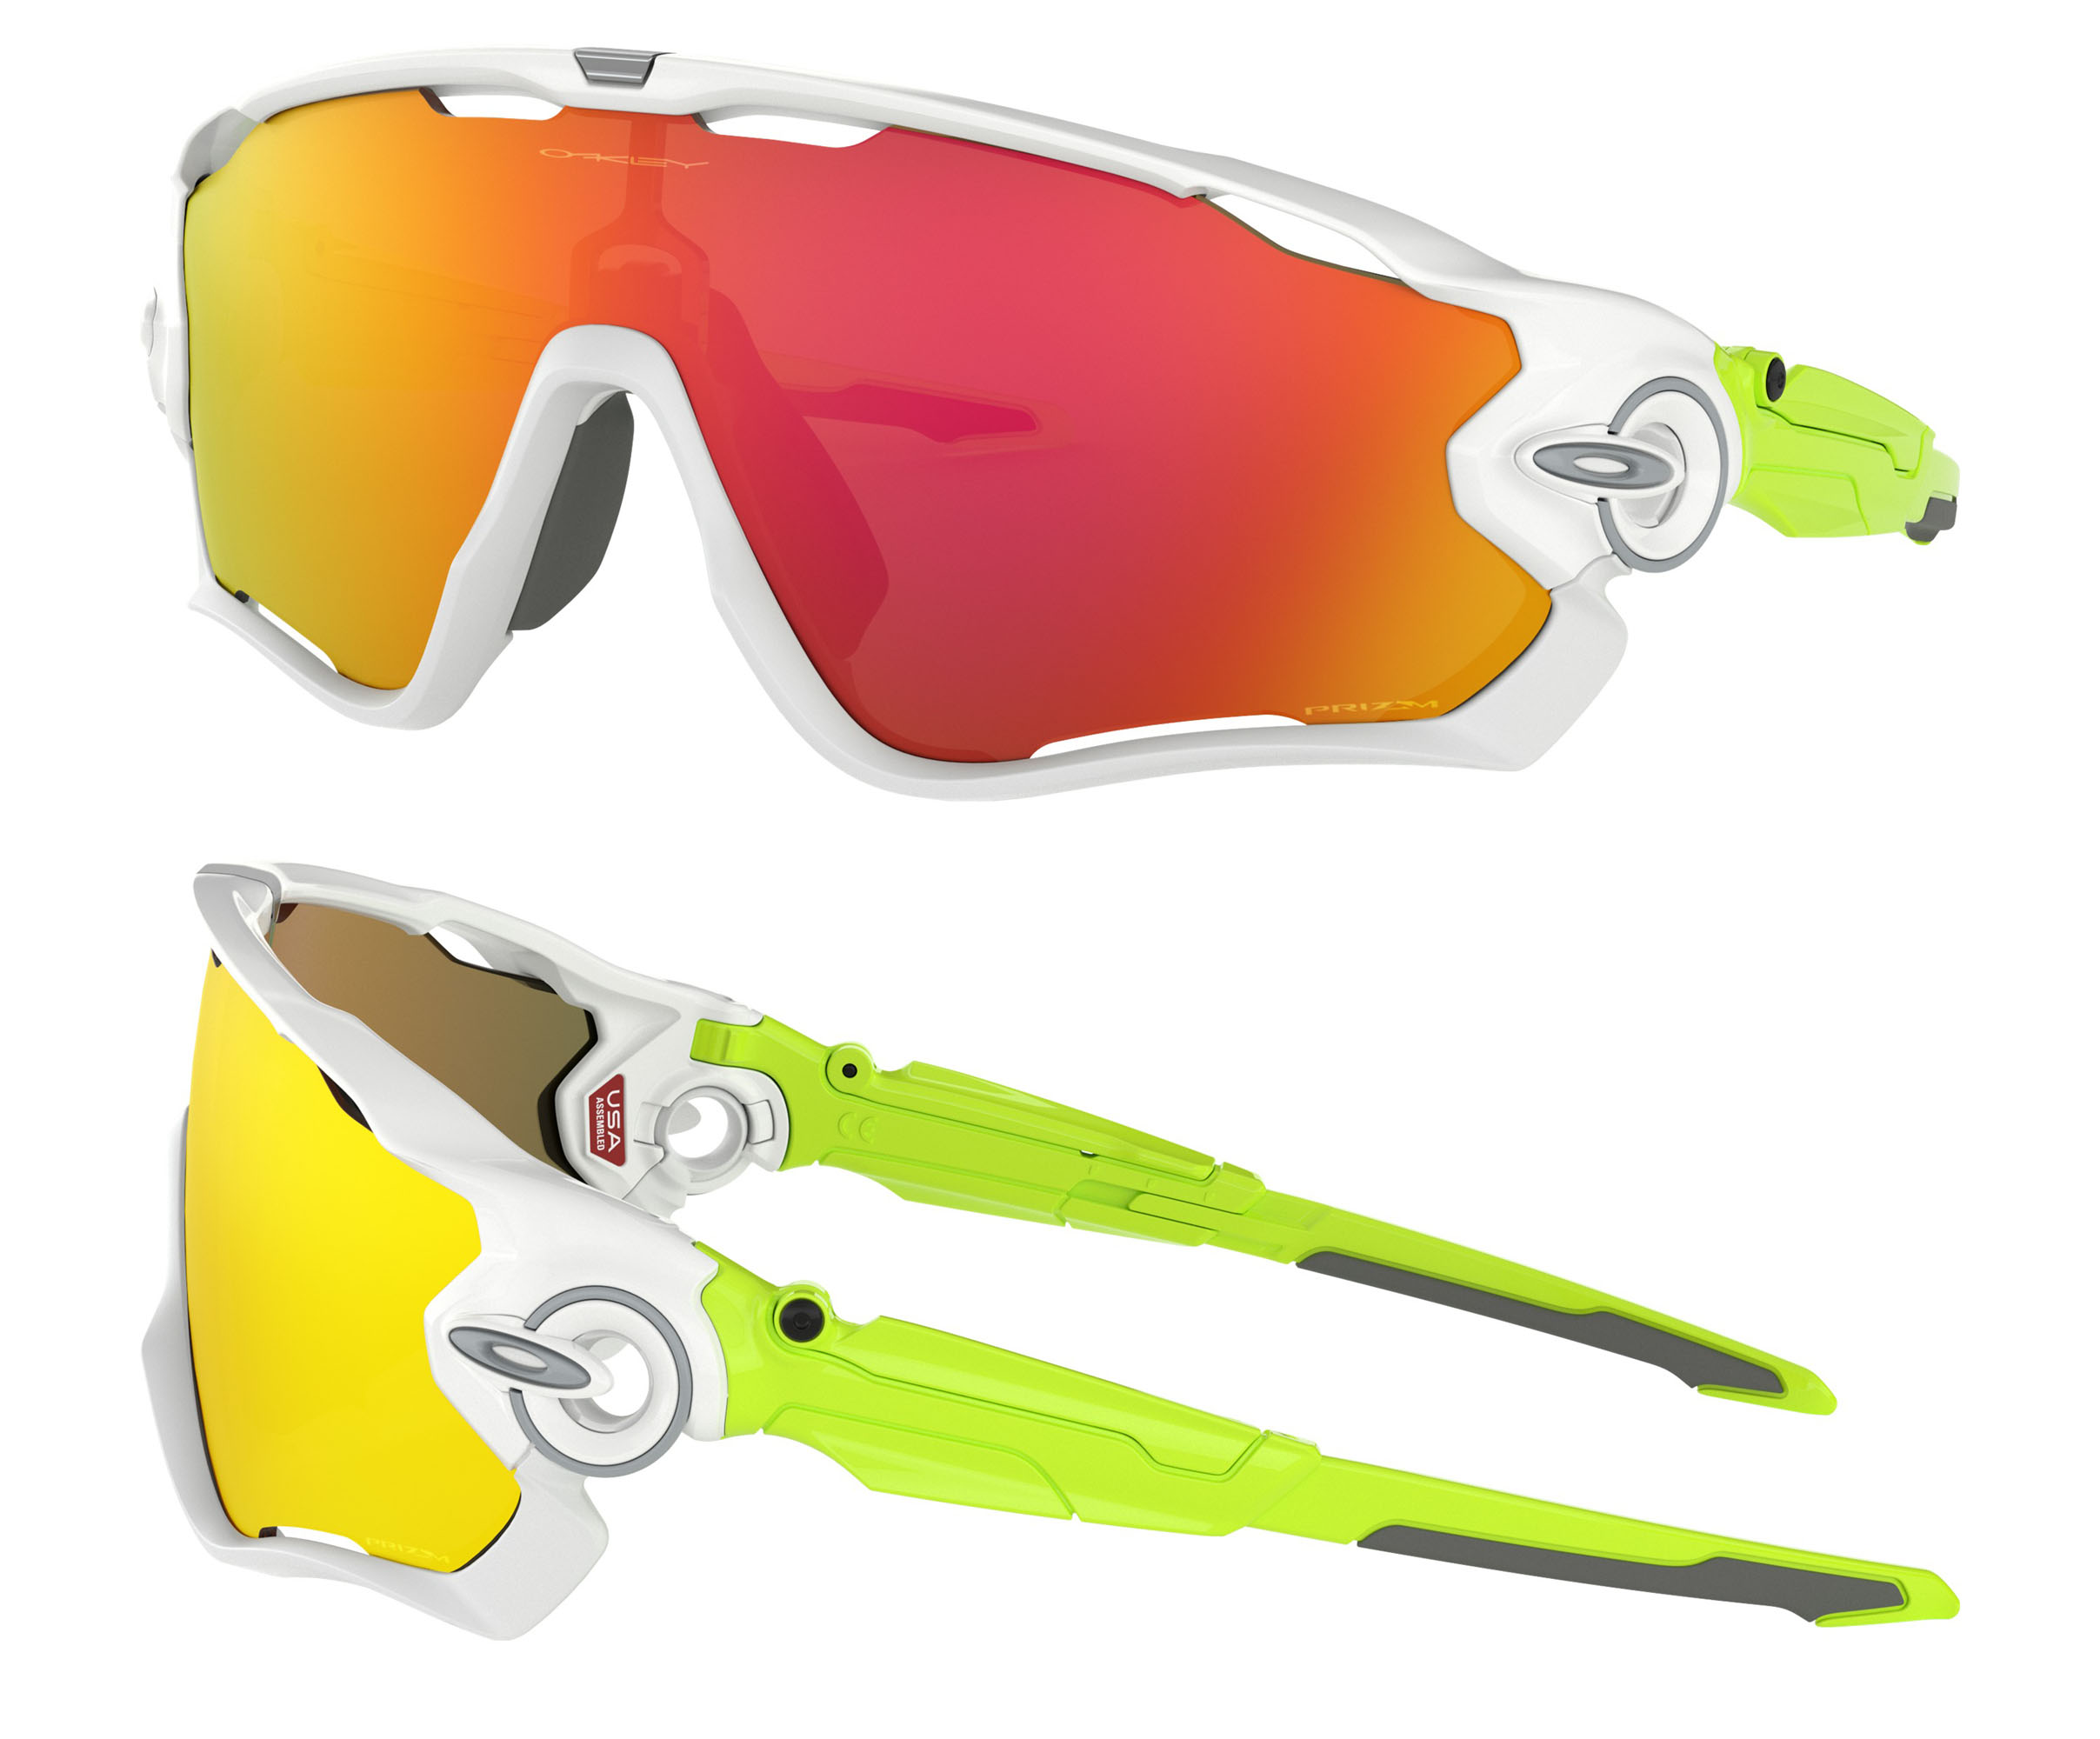 Oakley Origins Collection looks back w/ Limited Edition Sutro, Jawbreaker, and Frogskins